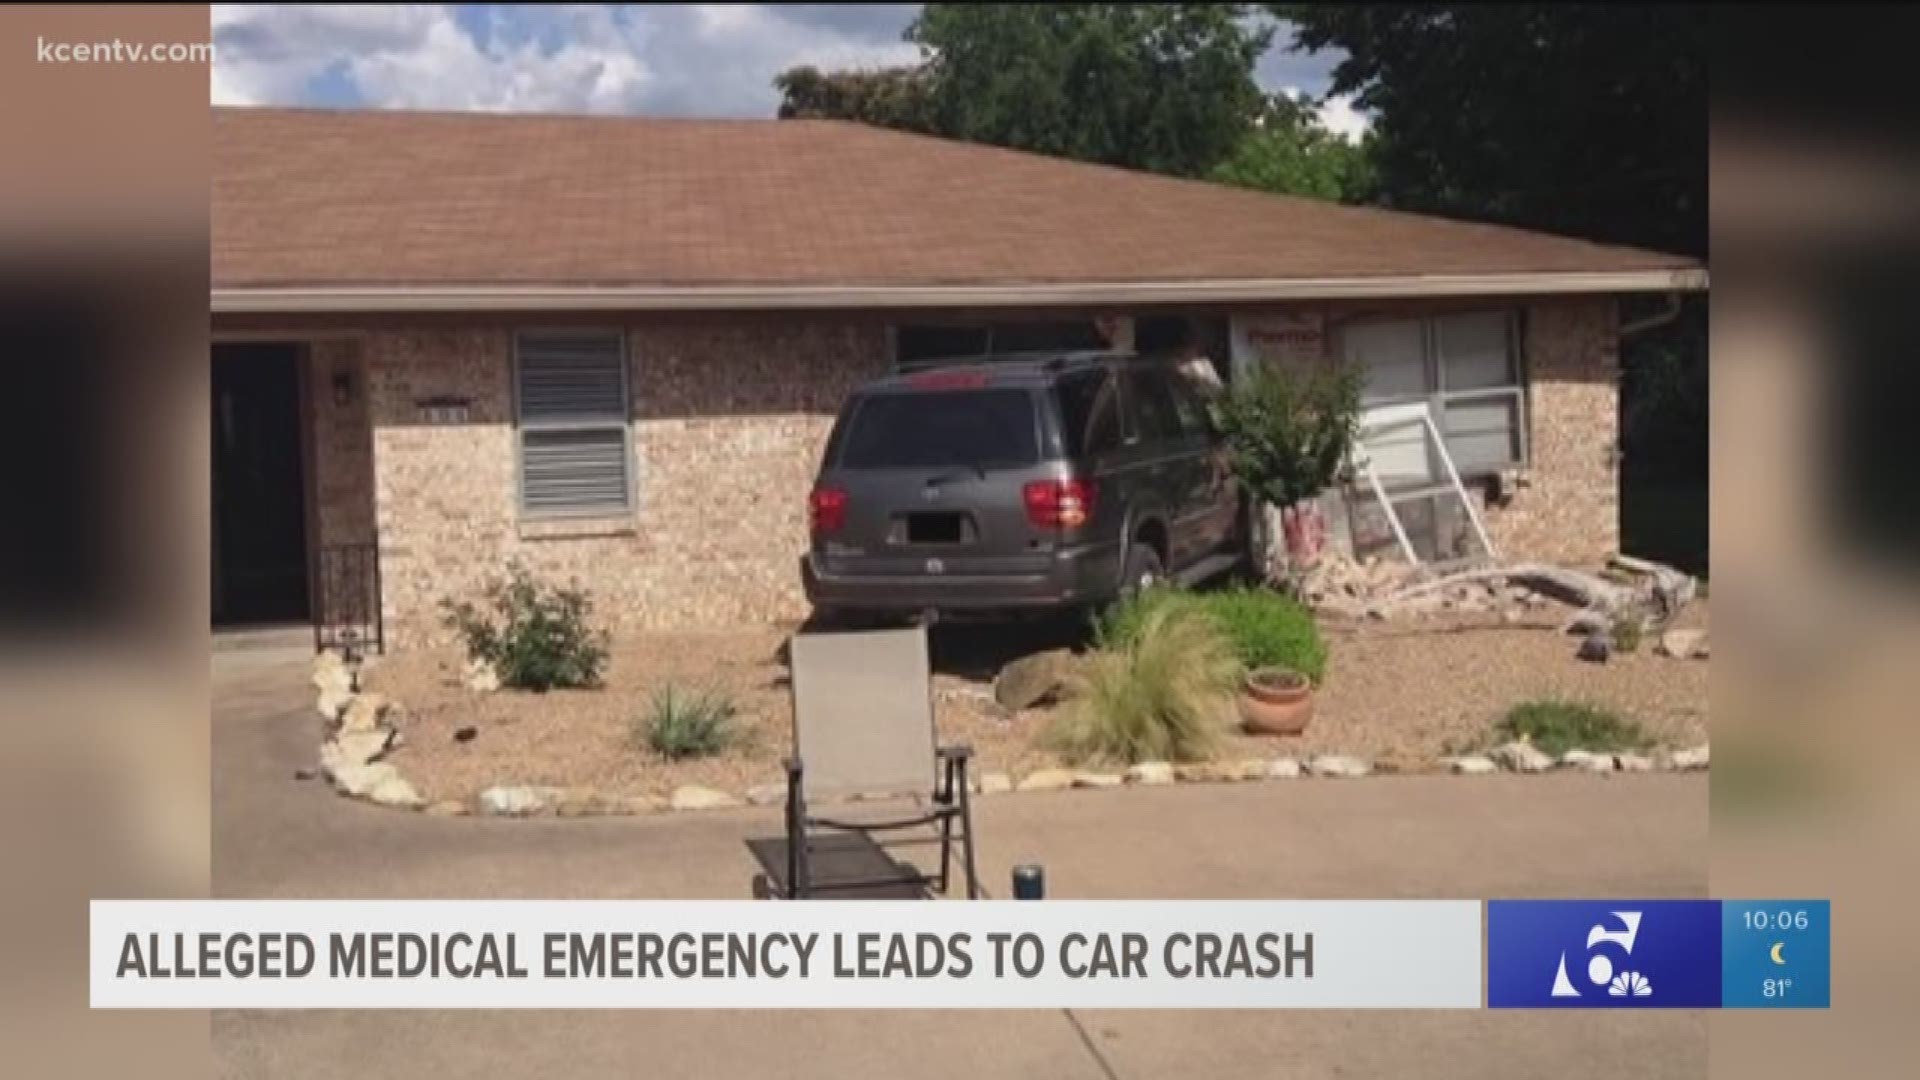 A person is recovering after crashing their car into someone's house. 